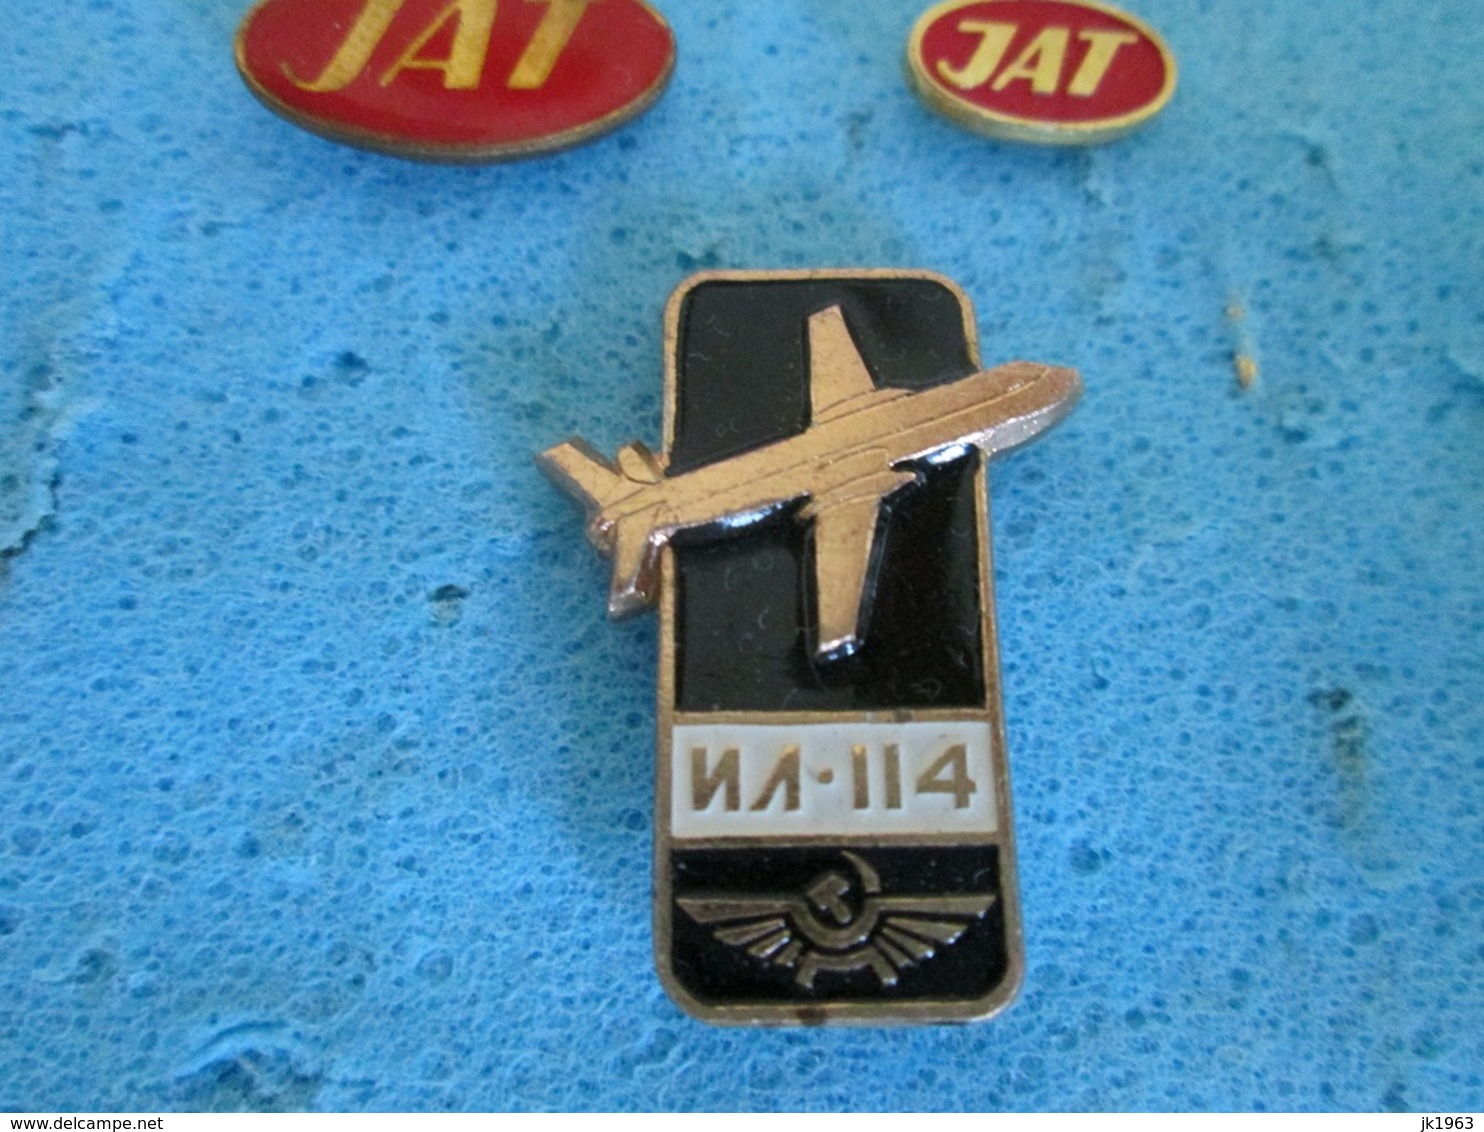 FIVE BADGES „JAT“ AND „IL 114“ - Airplanes